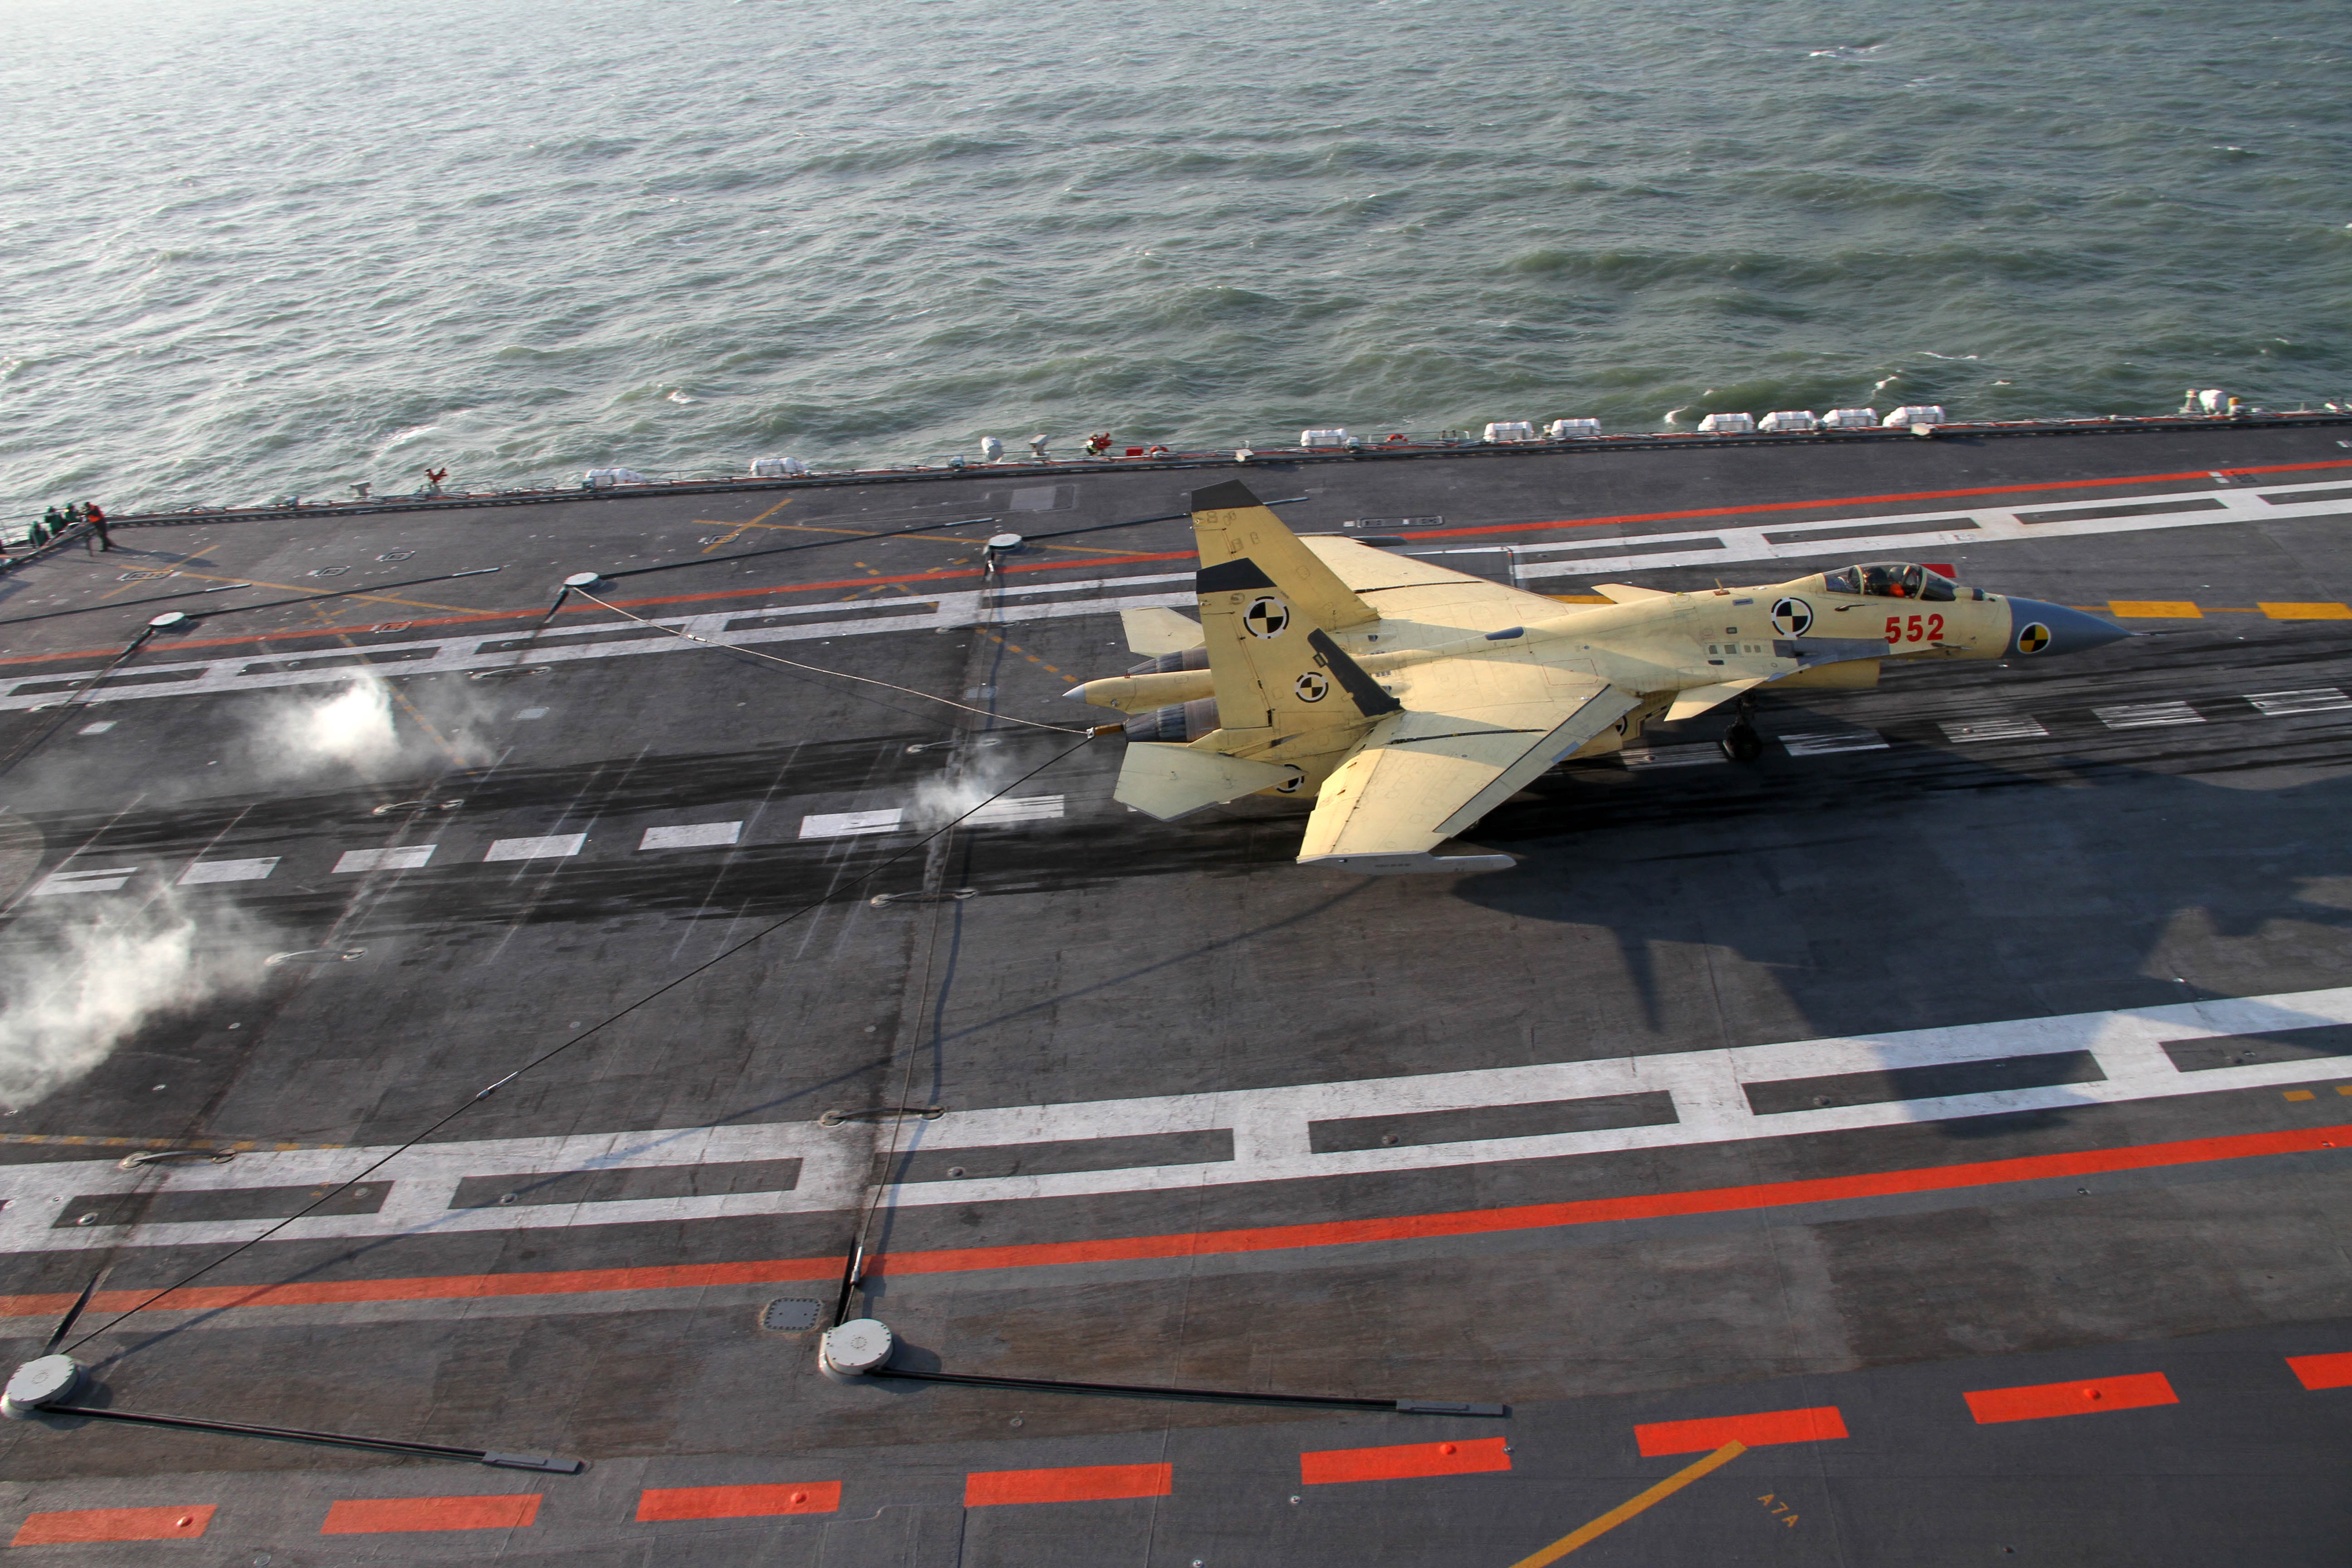 Fighter jets successfully land on aircraft carrier